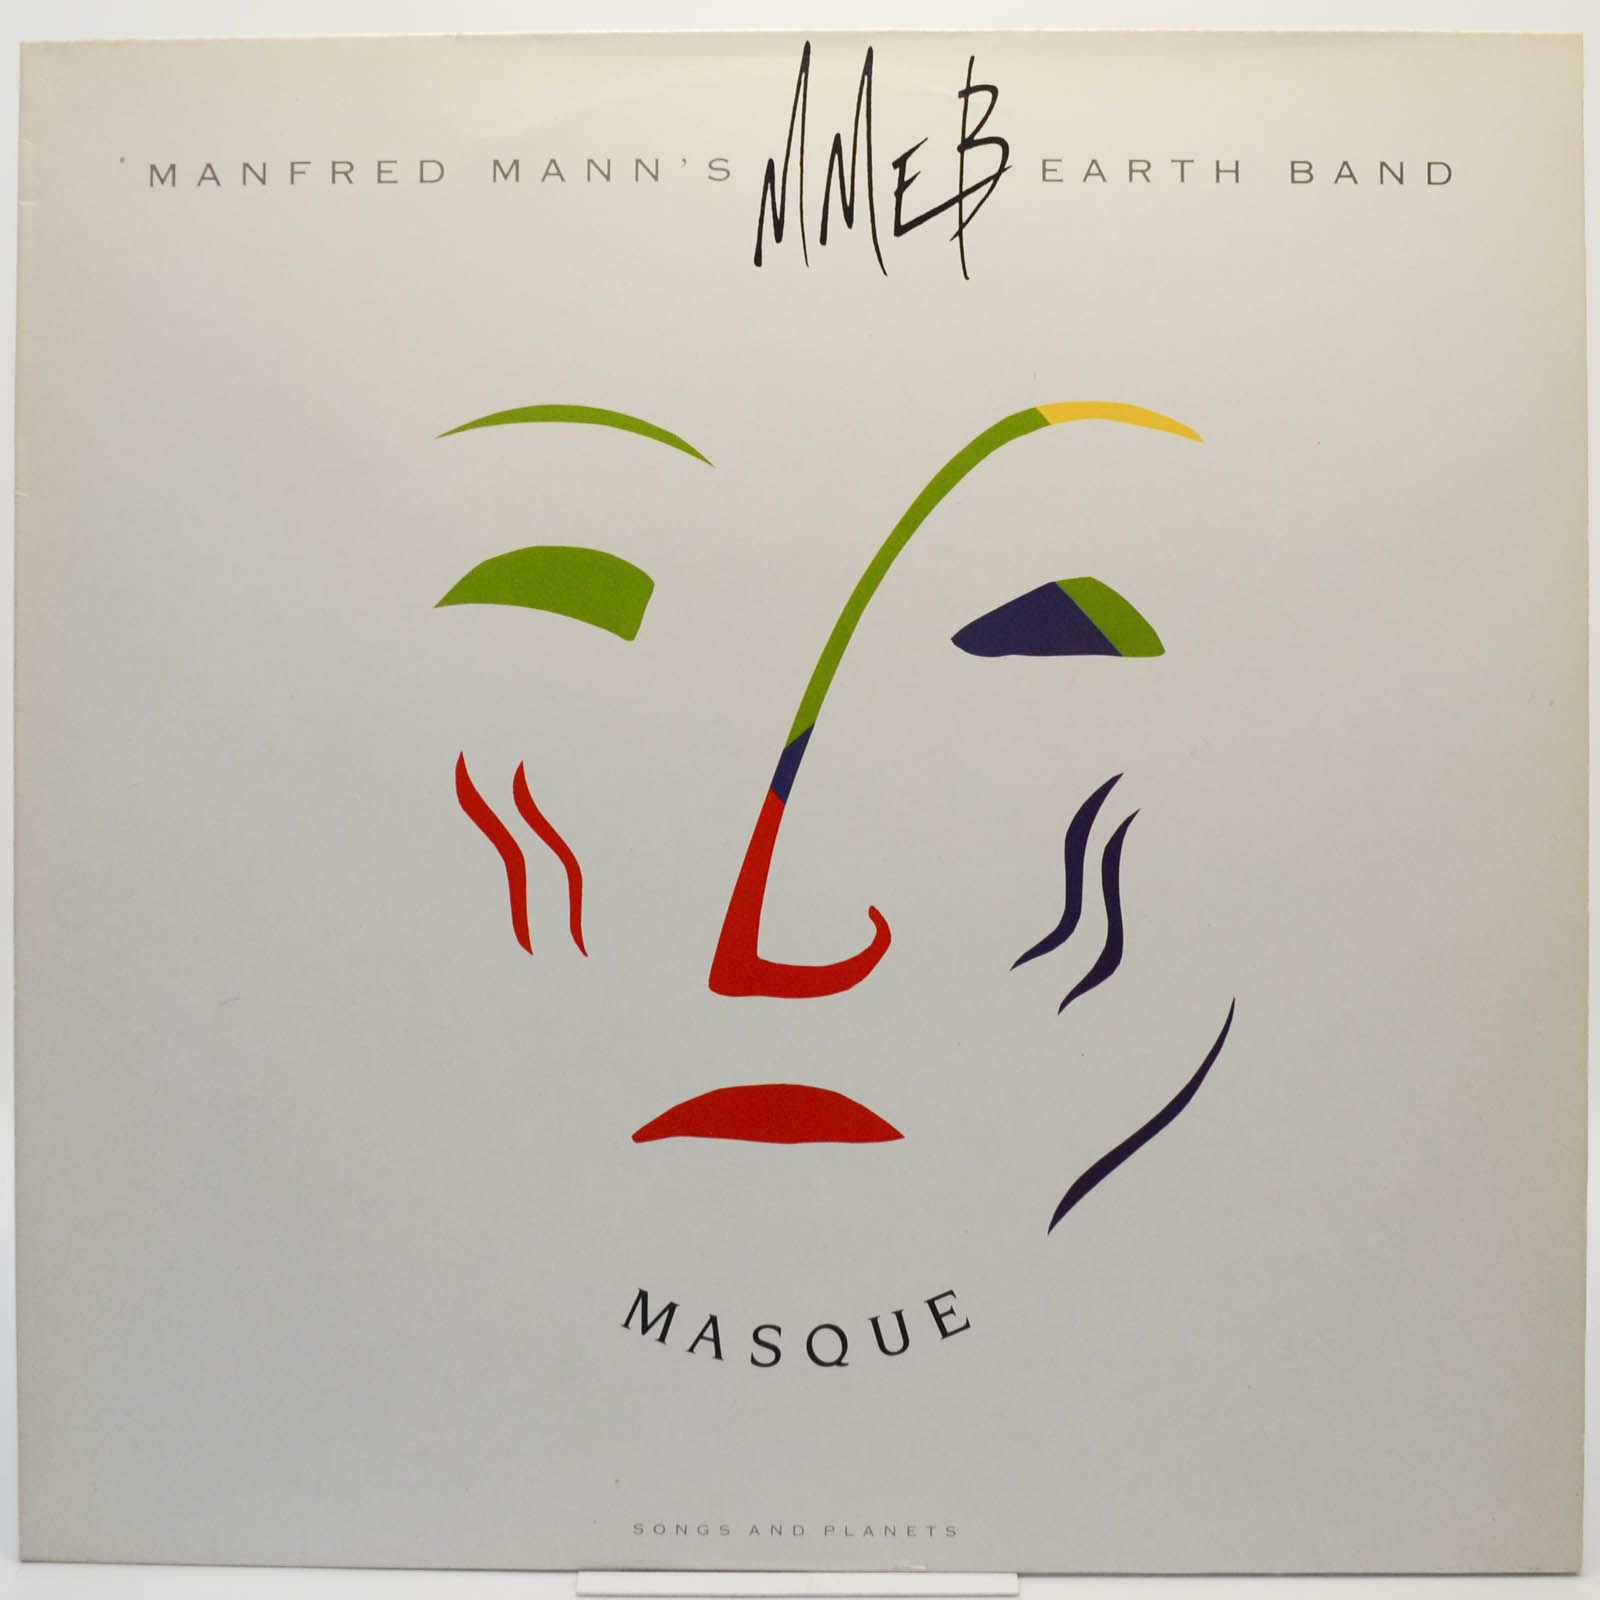 Manfred Mann's Earth Band — Masque (Songs And Planets), 1987